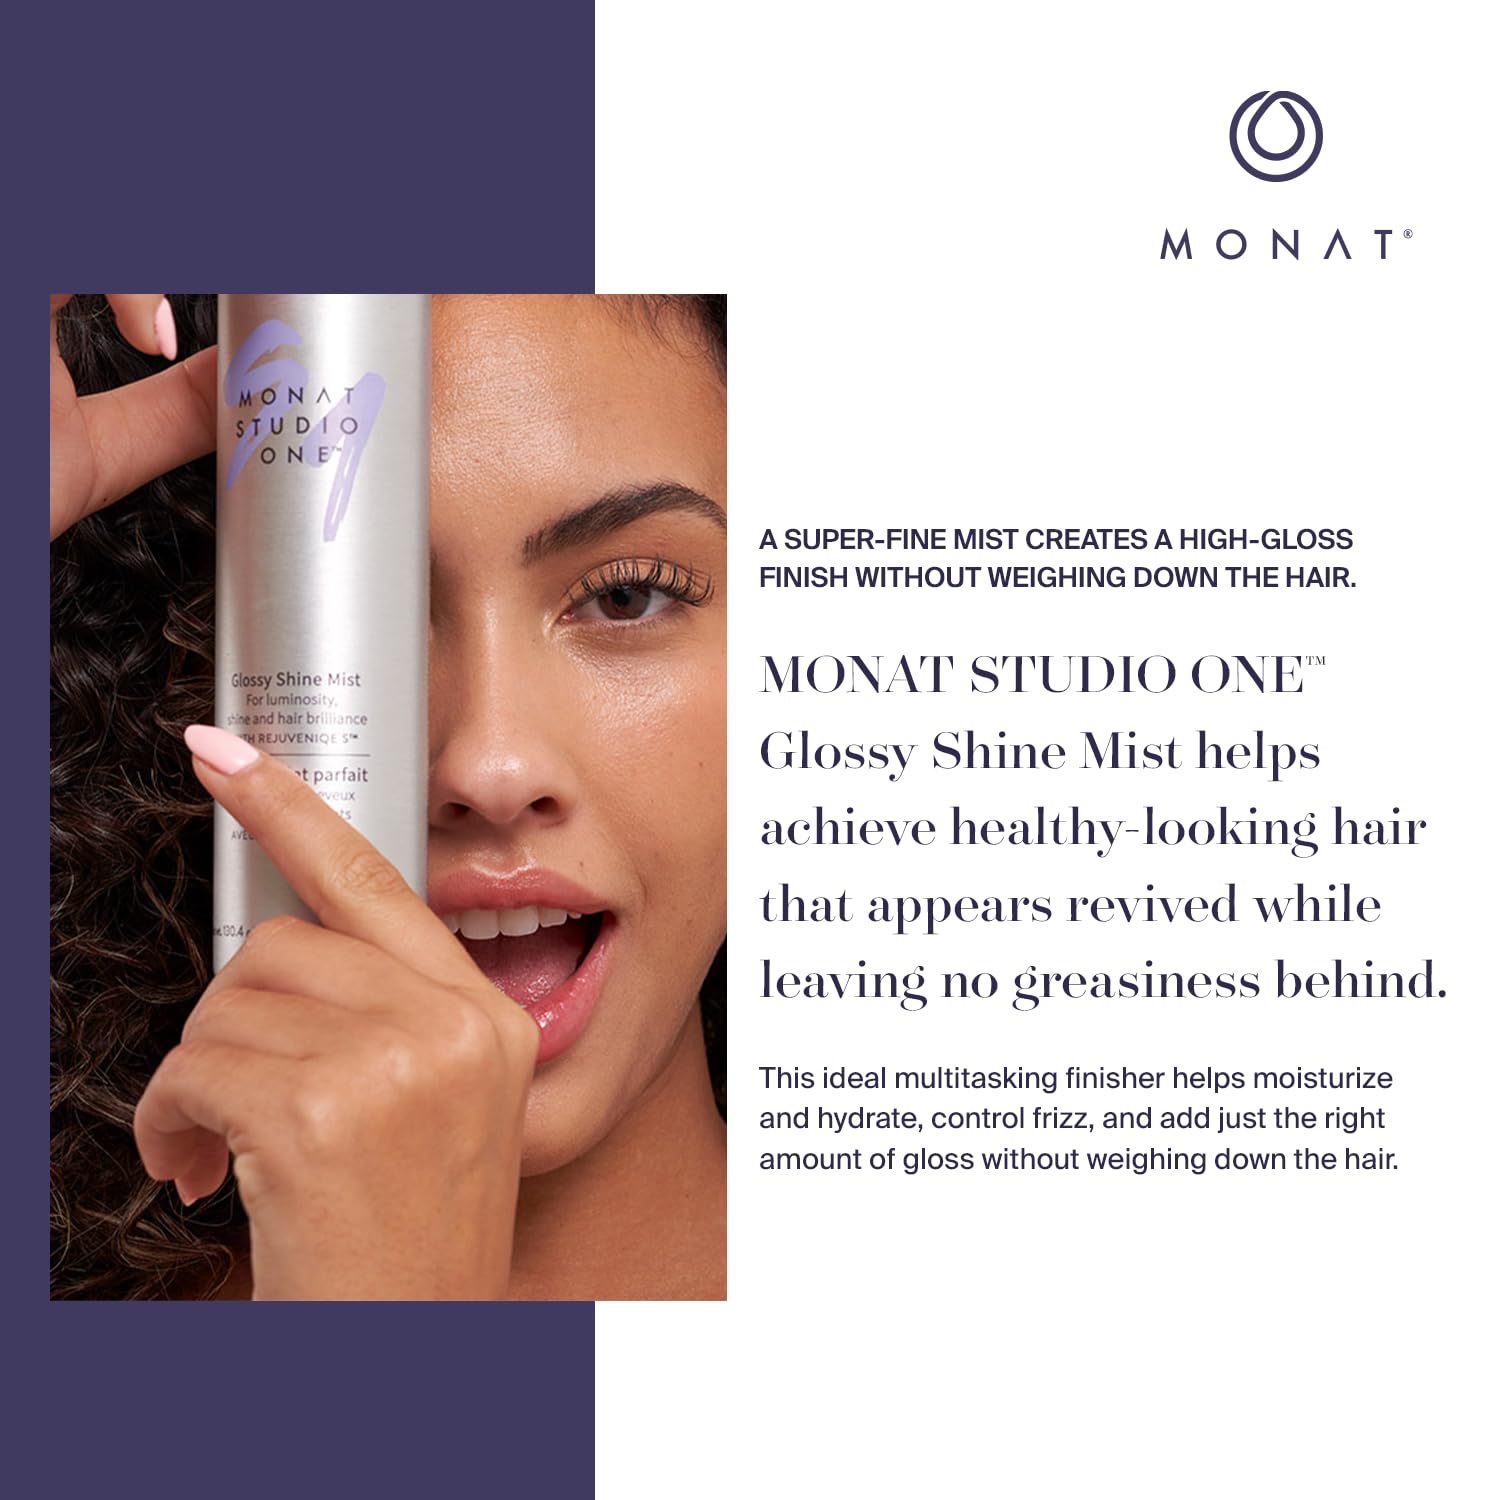 MONAT Studio One™ Glossy Shine Mist - A Lightweight, Frizz Control Micro Hair Mist that Hydrates and Provides Brilliant Shine to the Hair. - 130.4 g (4.6 oz.) ? 137.8 ml (4.6 fl. oz.) : Beauty & Personal Care